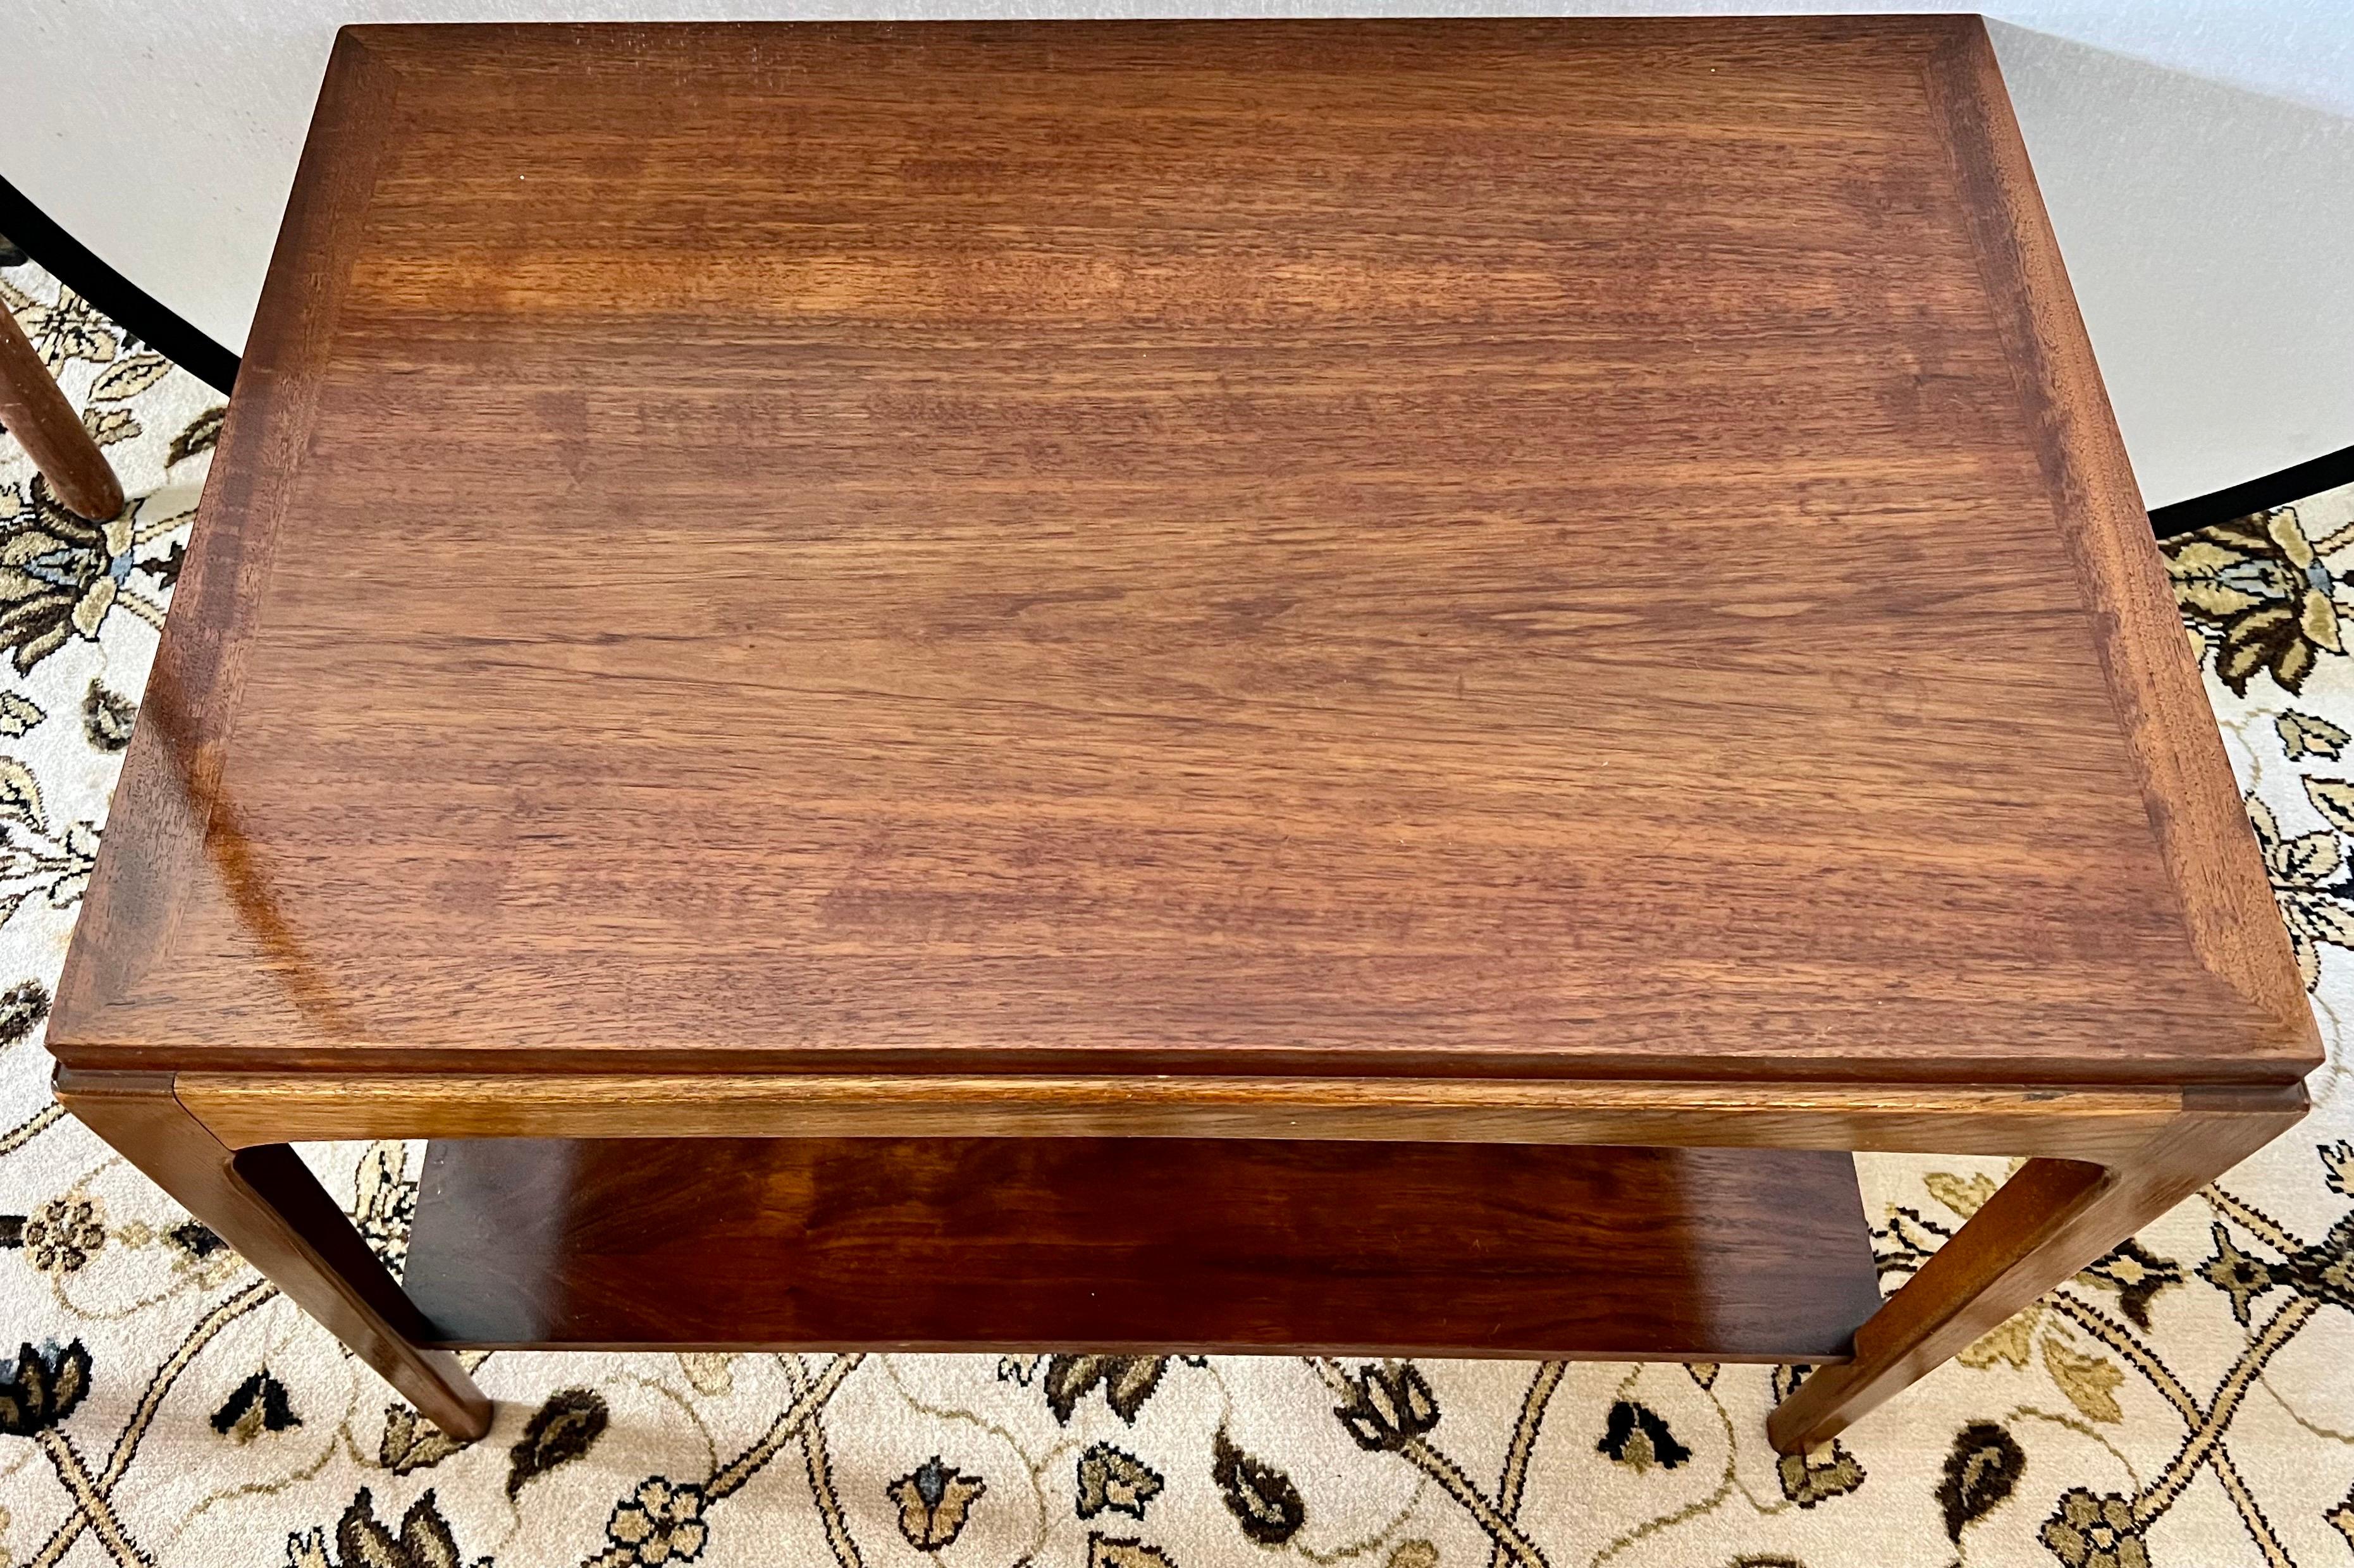 Mid century high quality two-tiered walnut side table by Lane Furniture's Altavista line. It’s simple clean lines will fit any mid century design aesthetic. Hallmarked on bottom. Great lines and better scale.